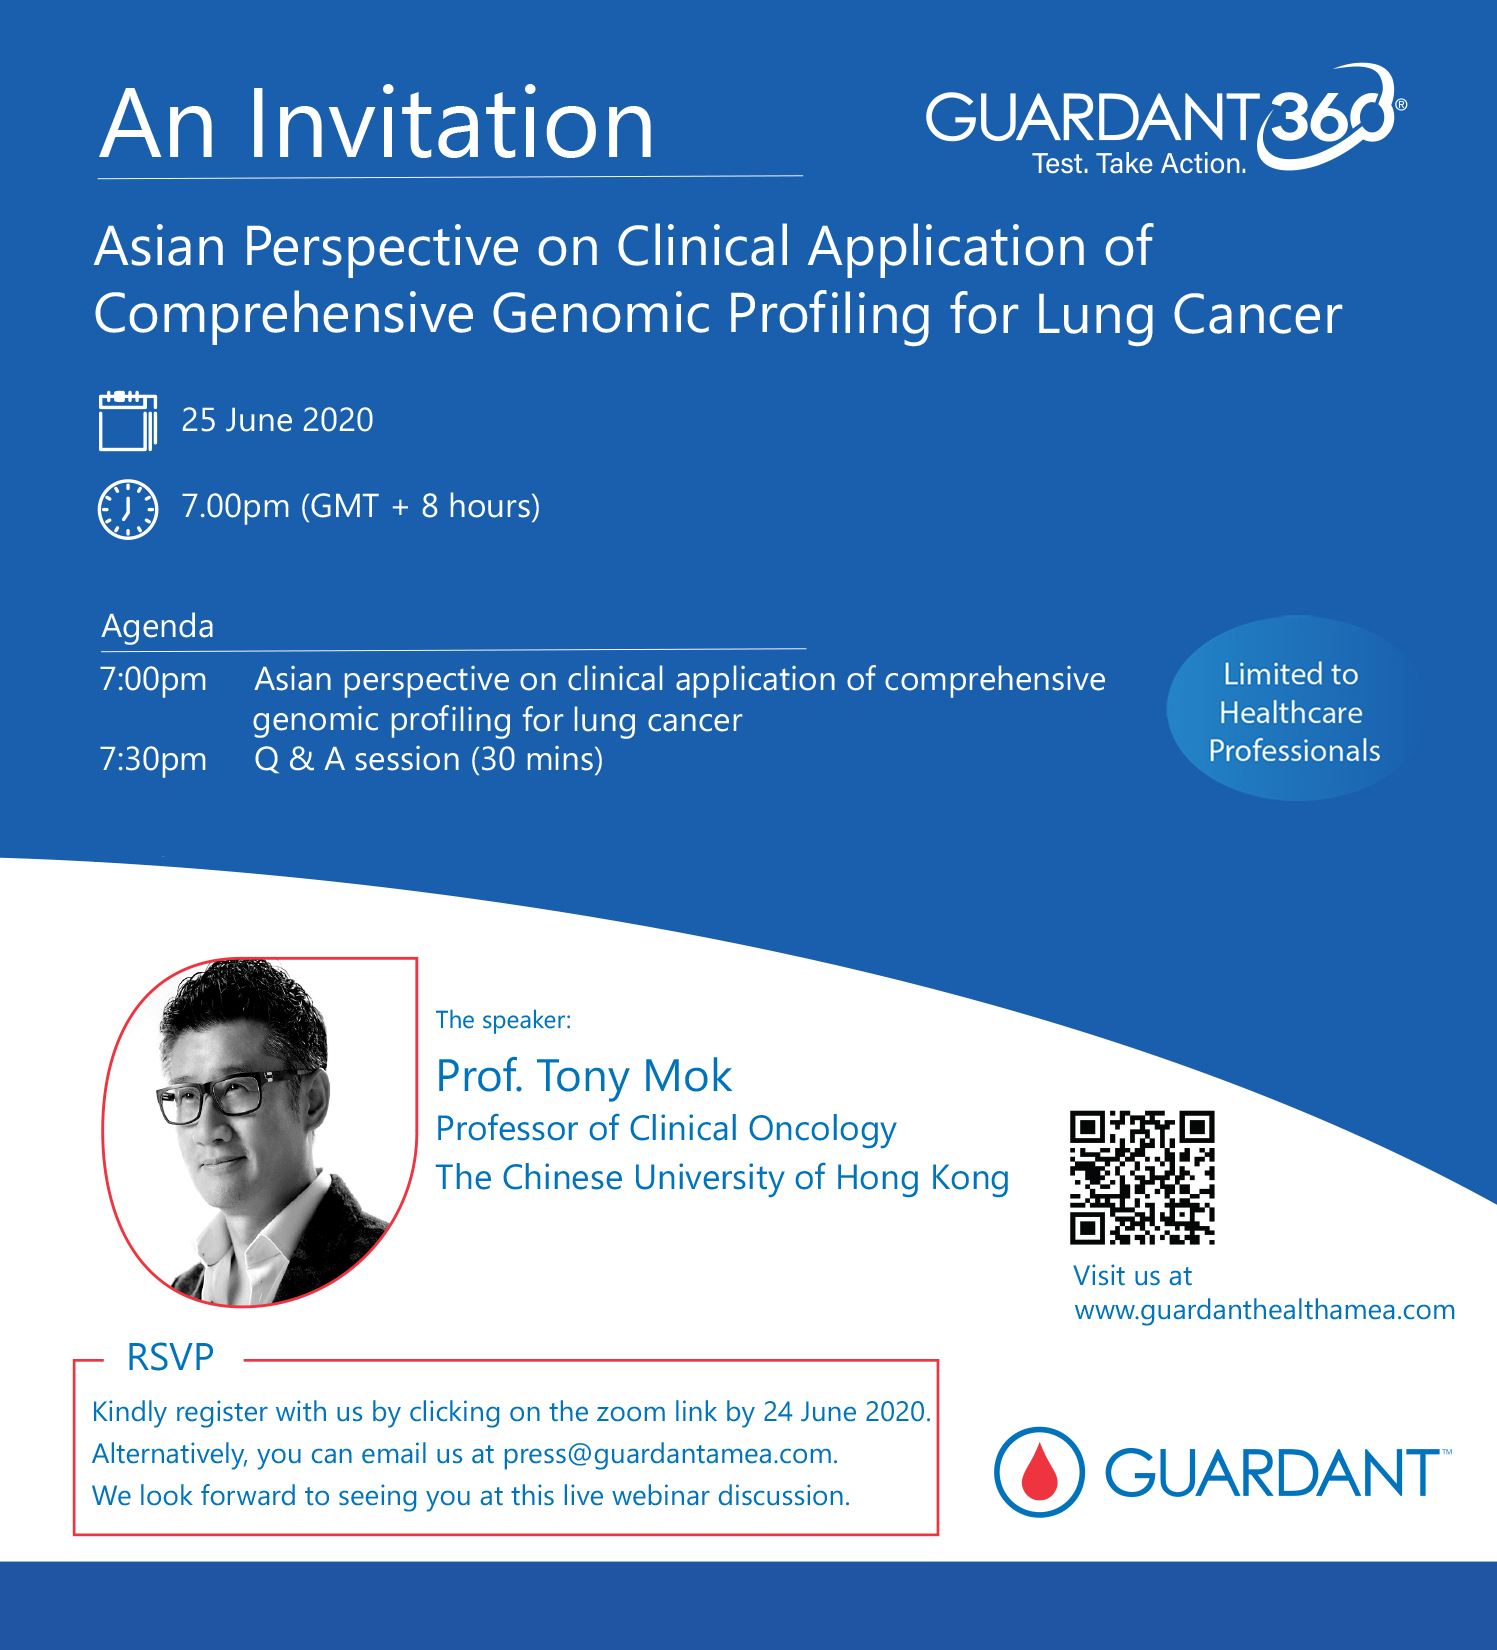 The Asian Perspective on Clinical Application of Comprehensive Genomic Profiling for Lung Cancer